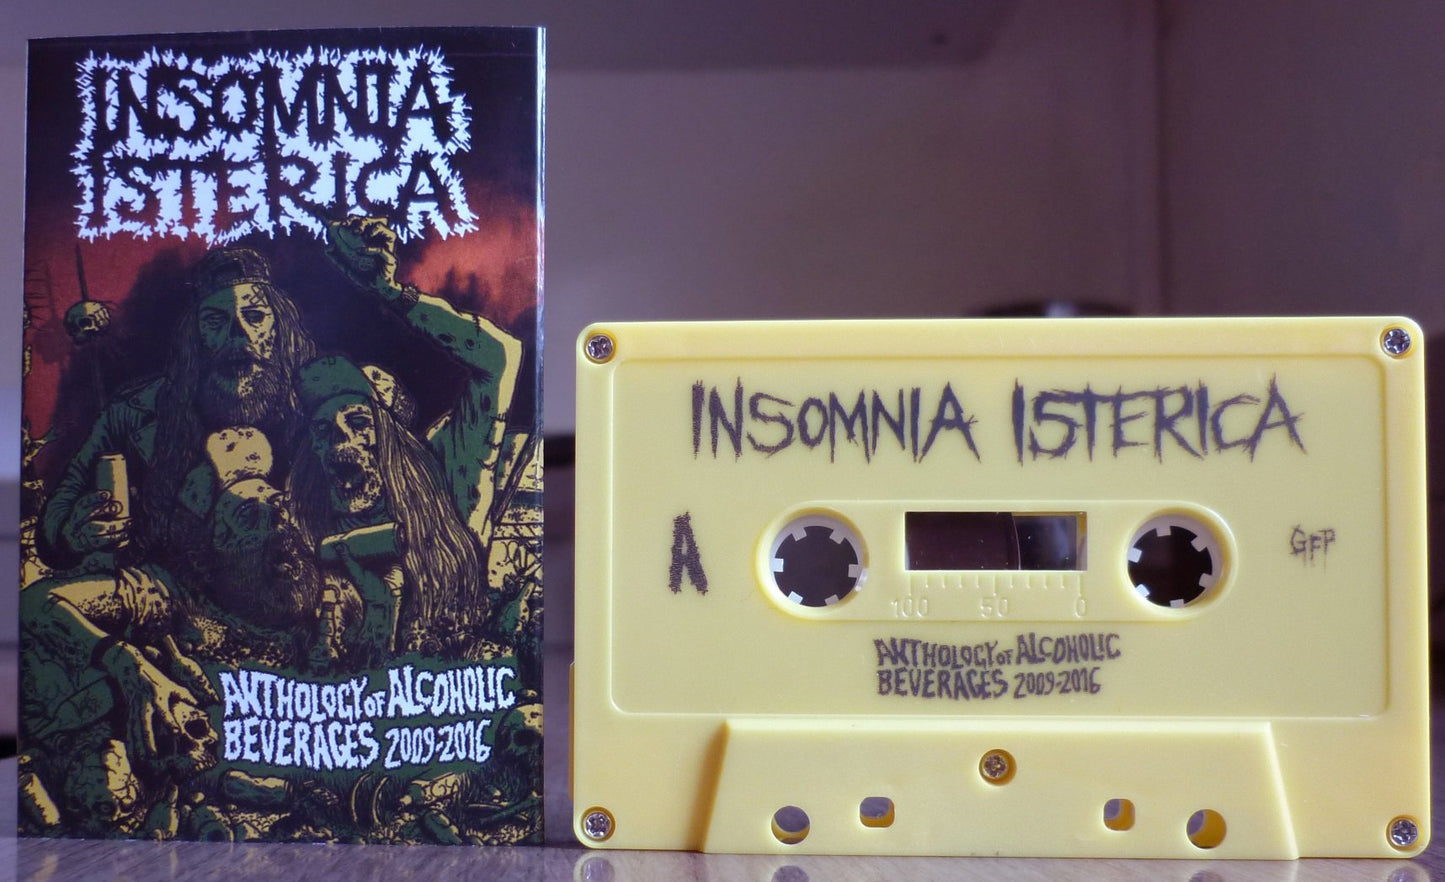 INSOMNIA ISTERICA - Anthology Of Alcoholic Beverages 2009-2016 Tape